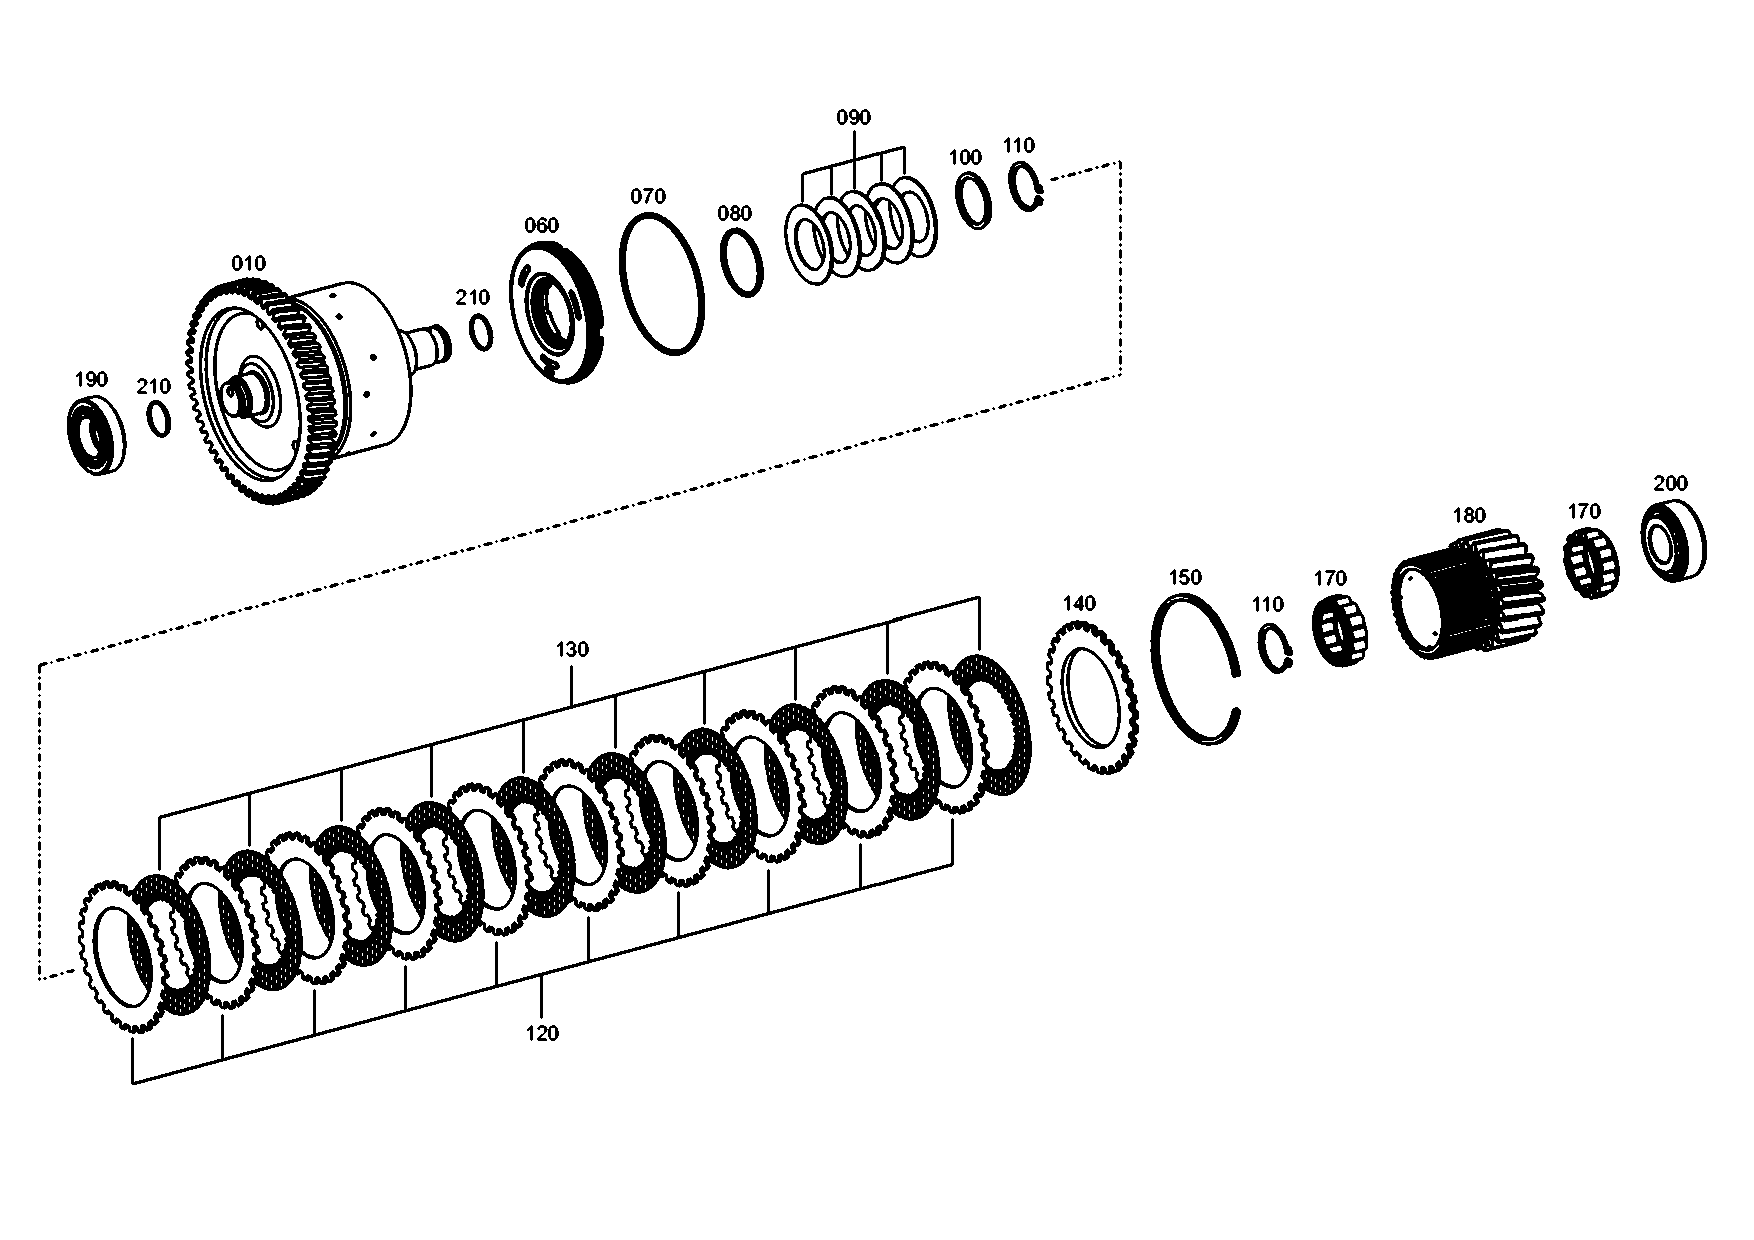 drawing for VOITH-GETRIEBE KG 01.0042.67 - O-RING (figure 3)